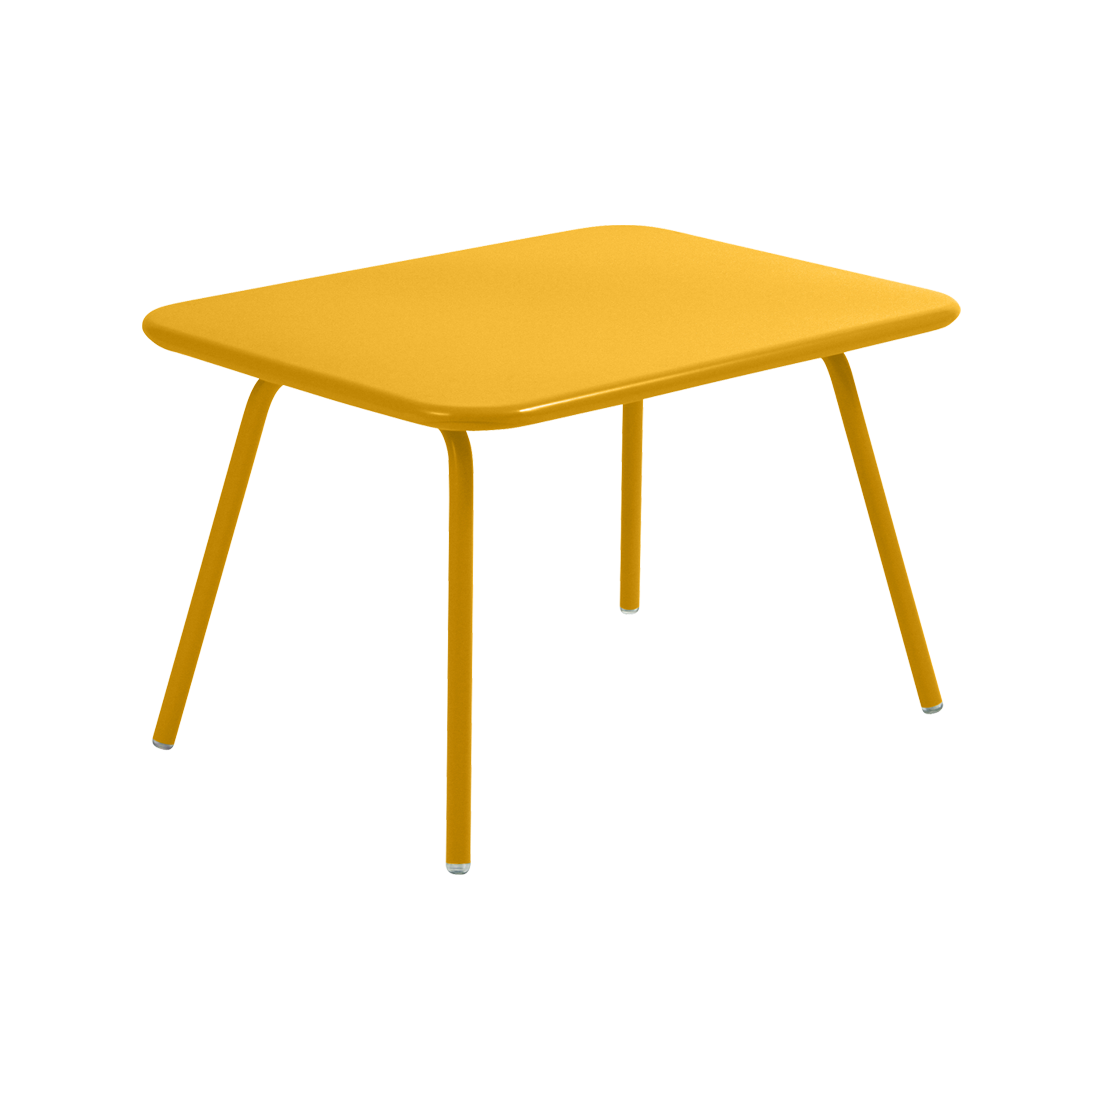 LUXEMBOURG KID / 4171 TABLE 76 X 55.5CM